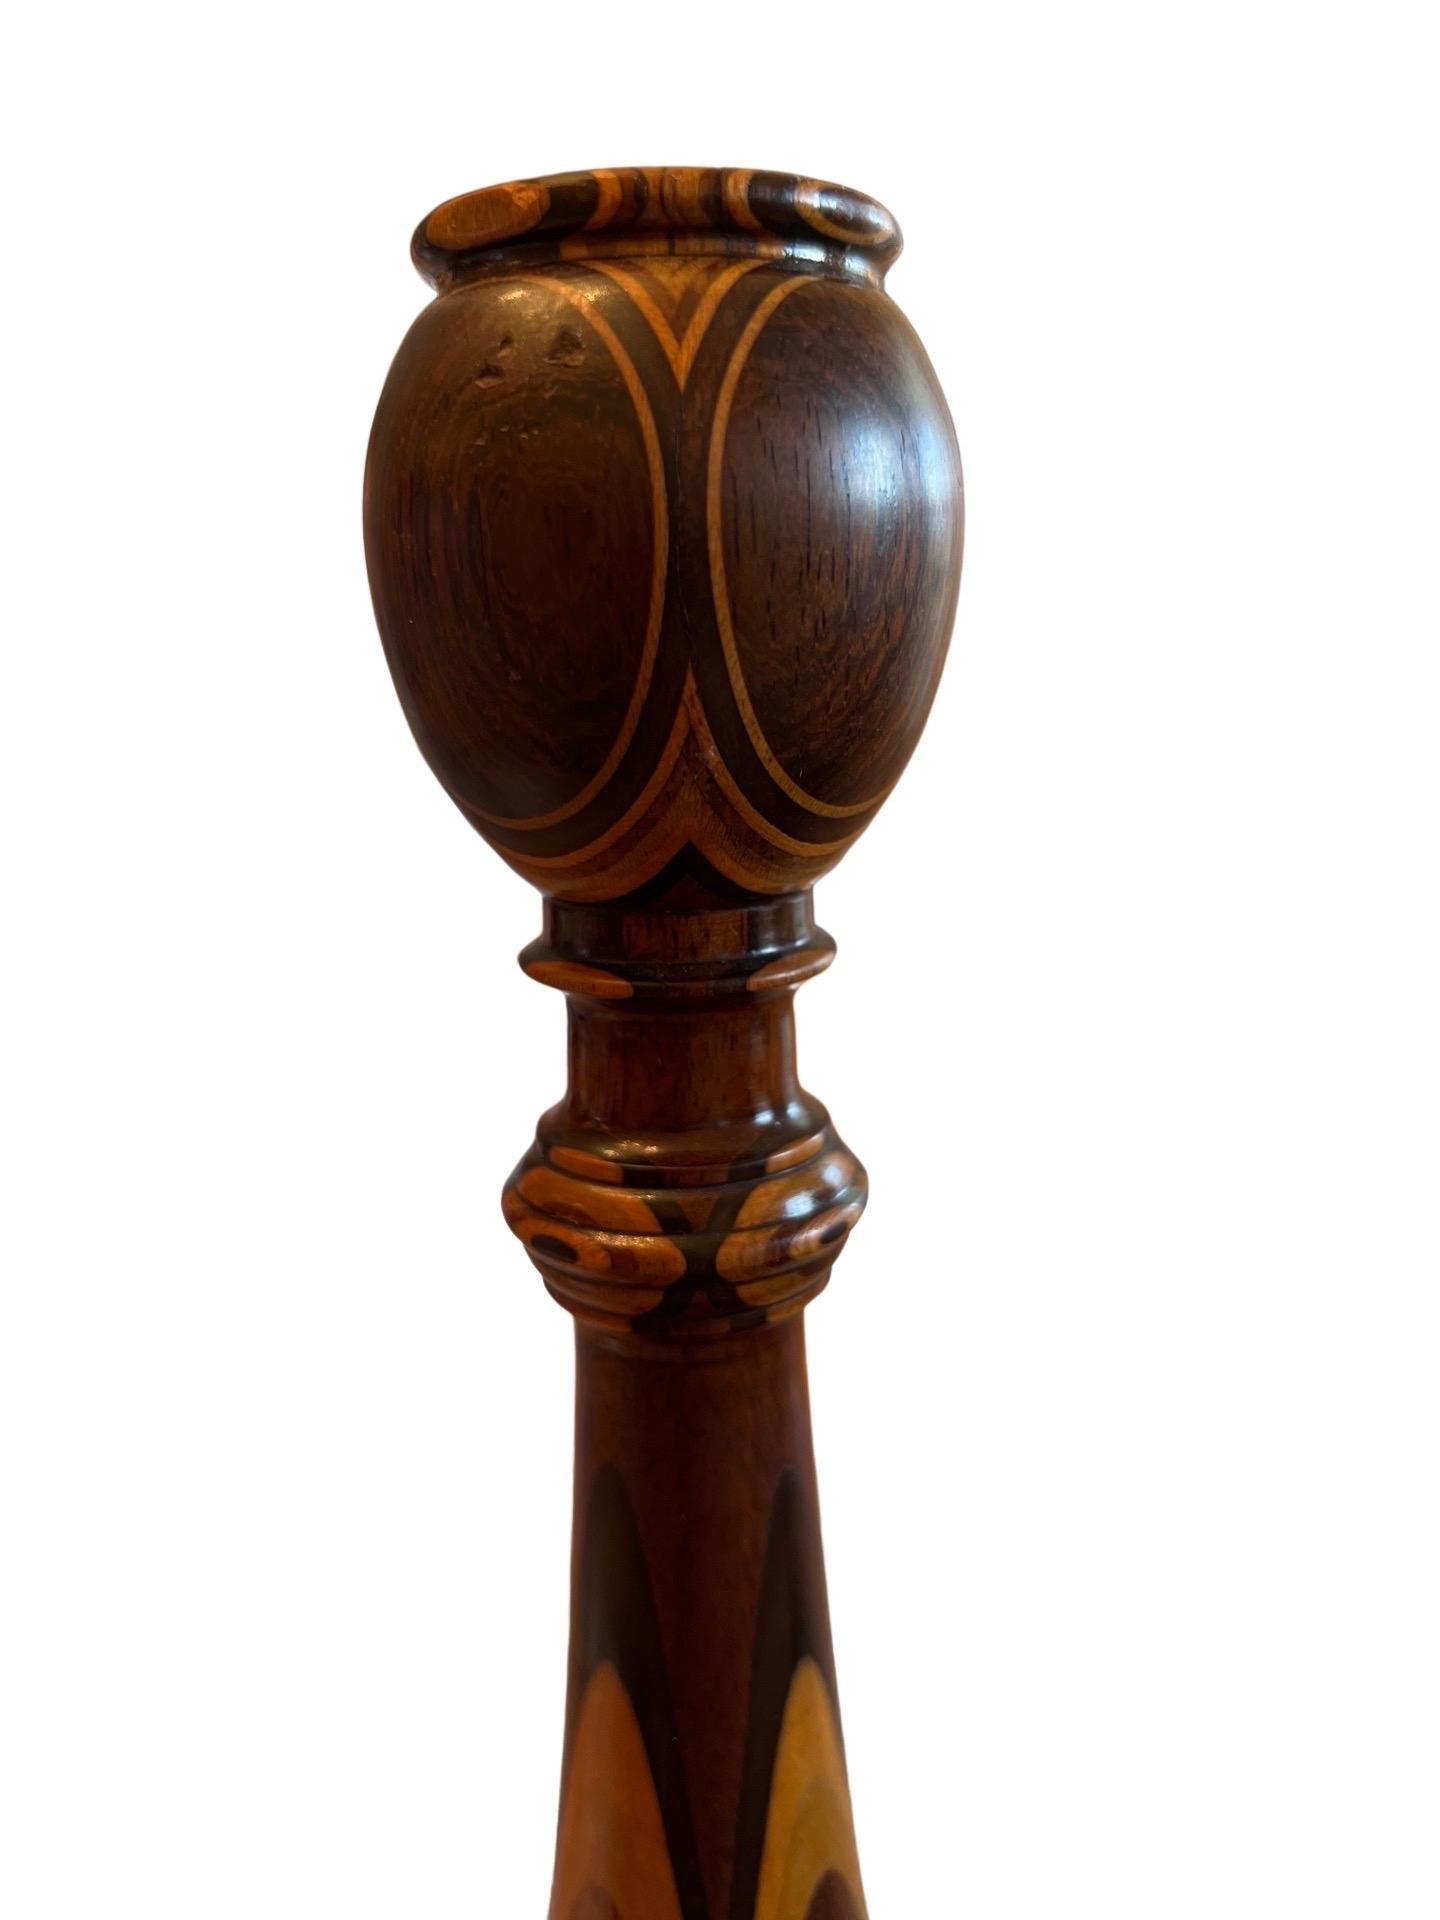 Fine American Turned Walnut & Mixed Marquetry Wood Candlesticks, circa 1925 For Sale 1